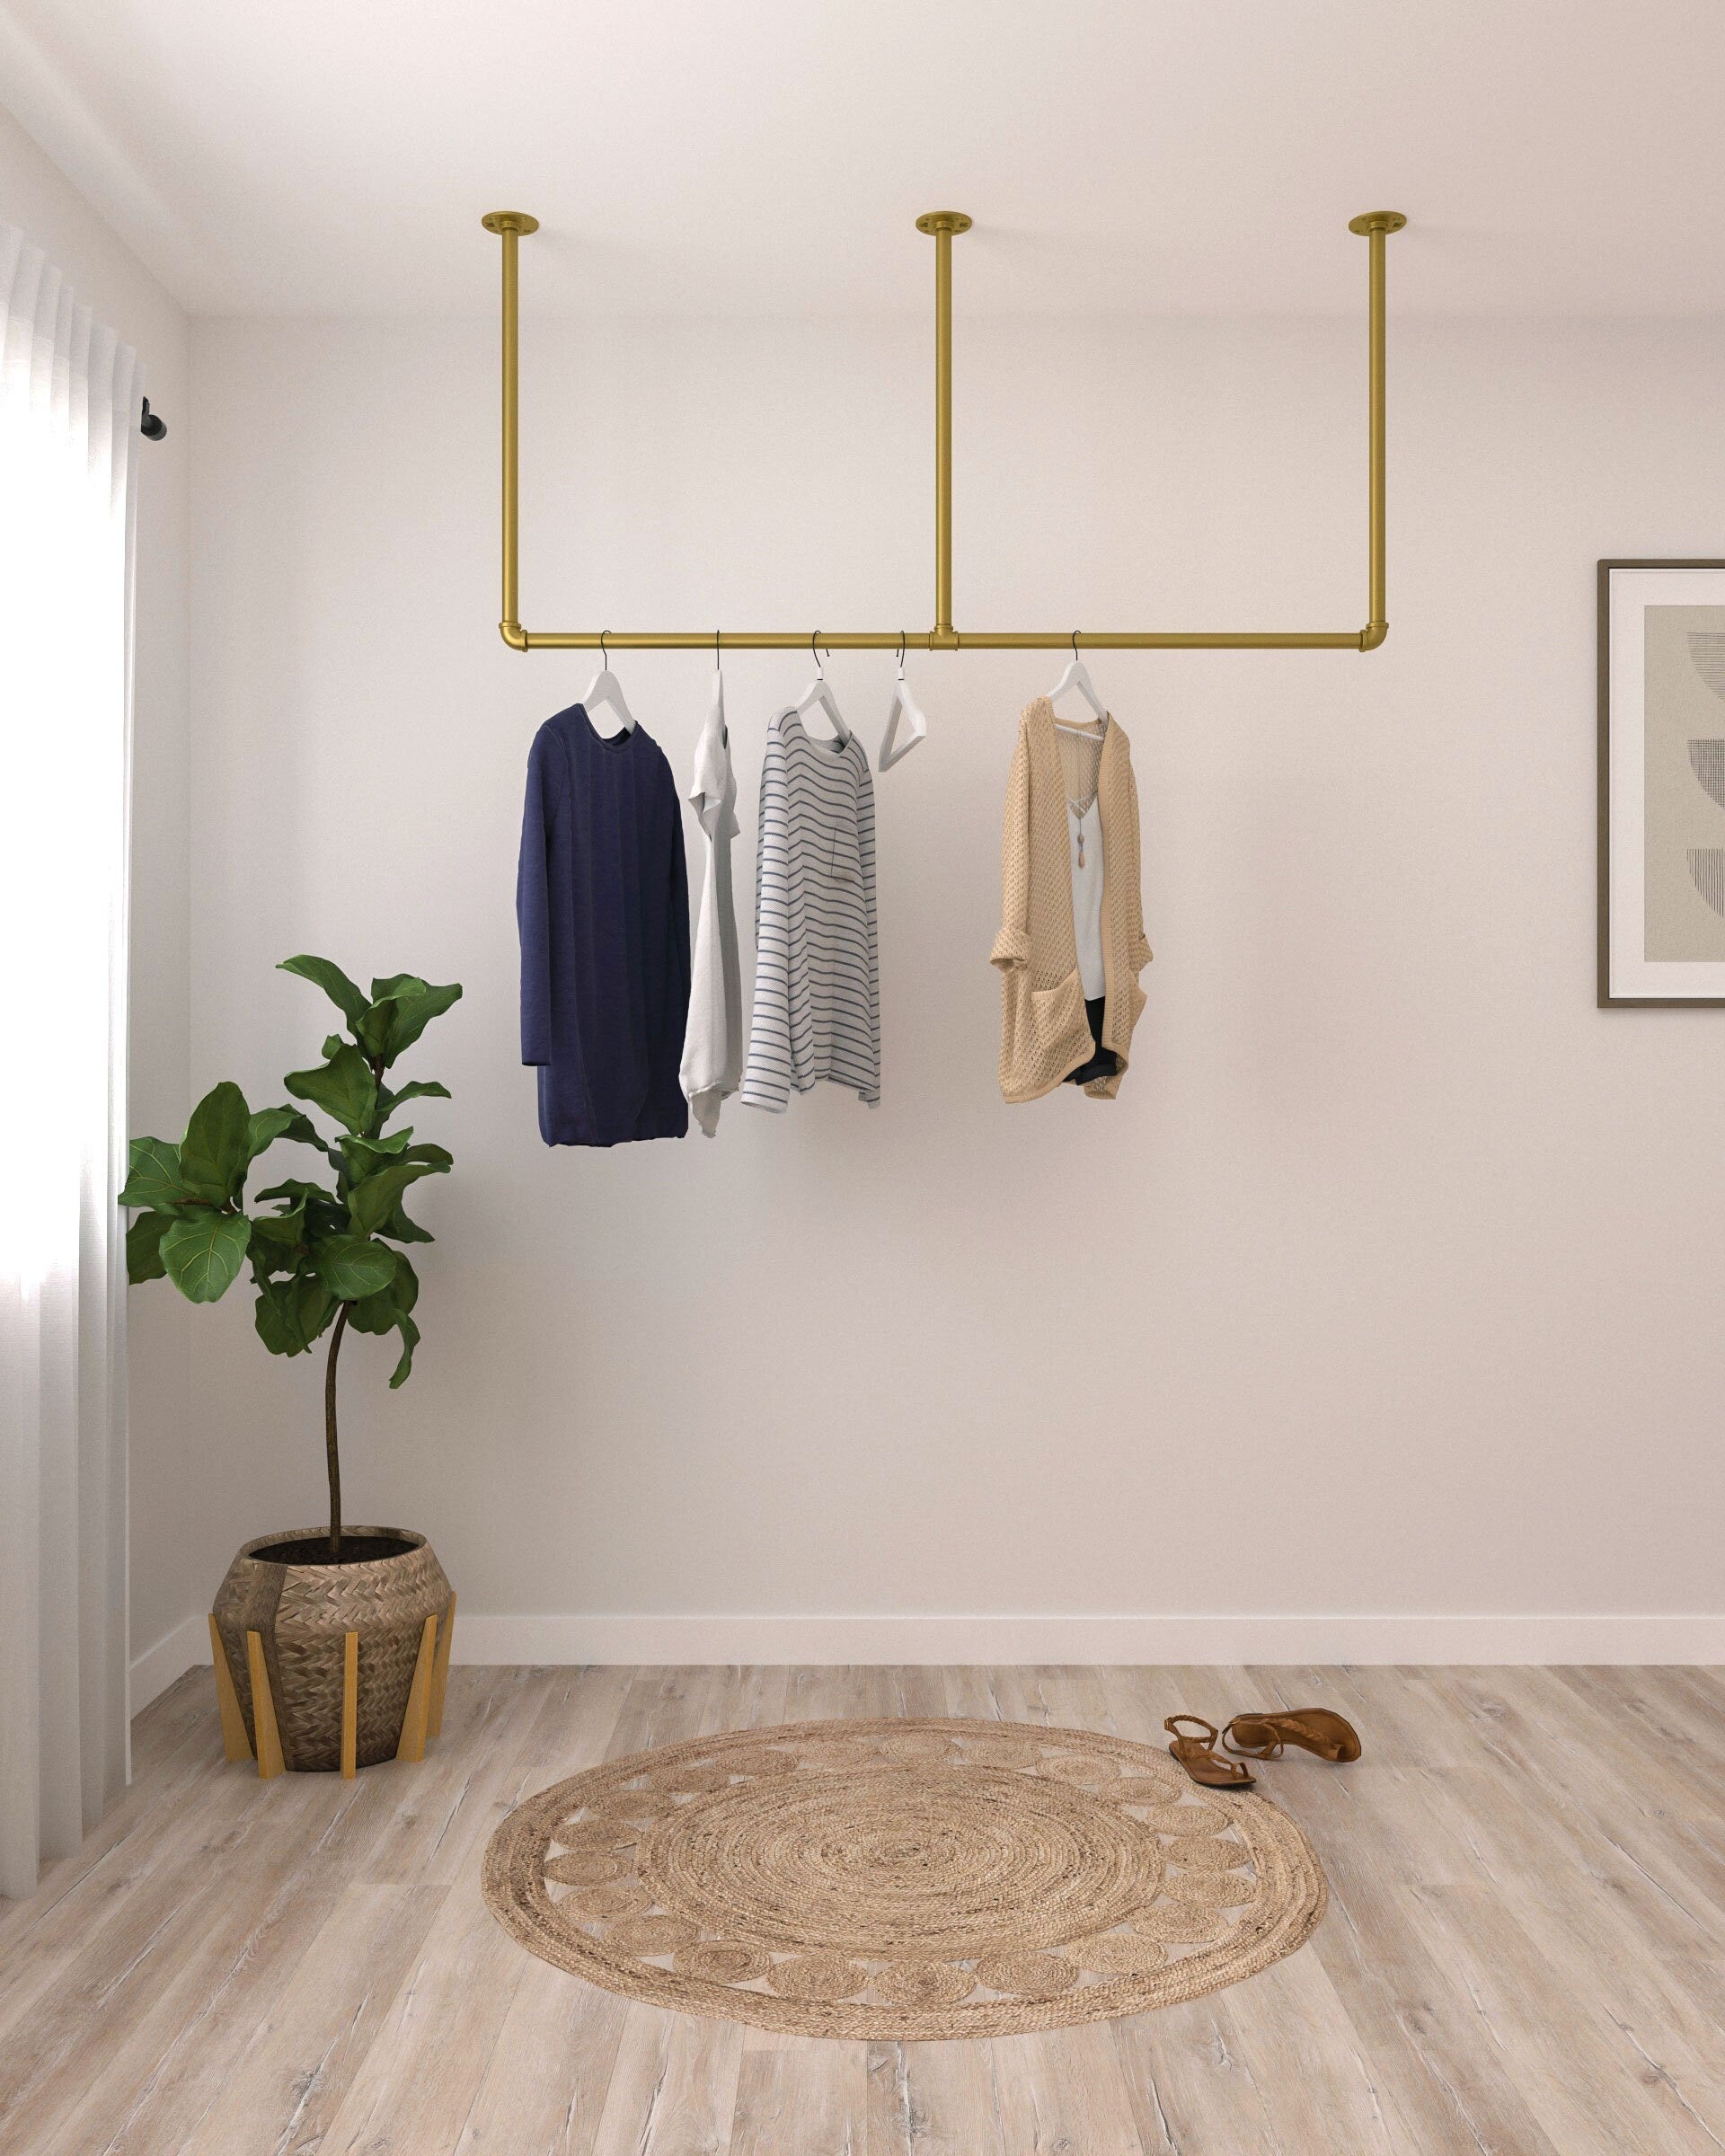 Bem Heavy Duty Minimalistic Clothes Rack, a ceiling-mounted shop display garment rail, suitable for various retail settings.